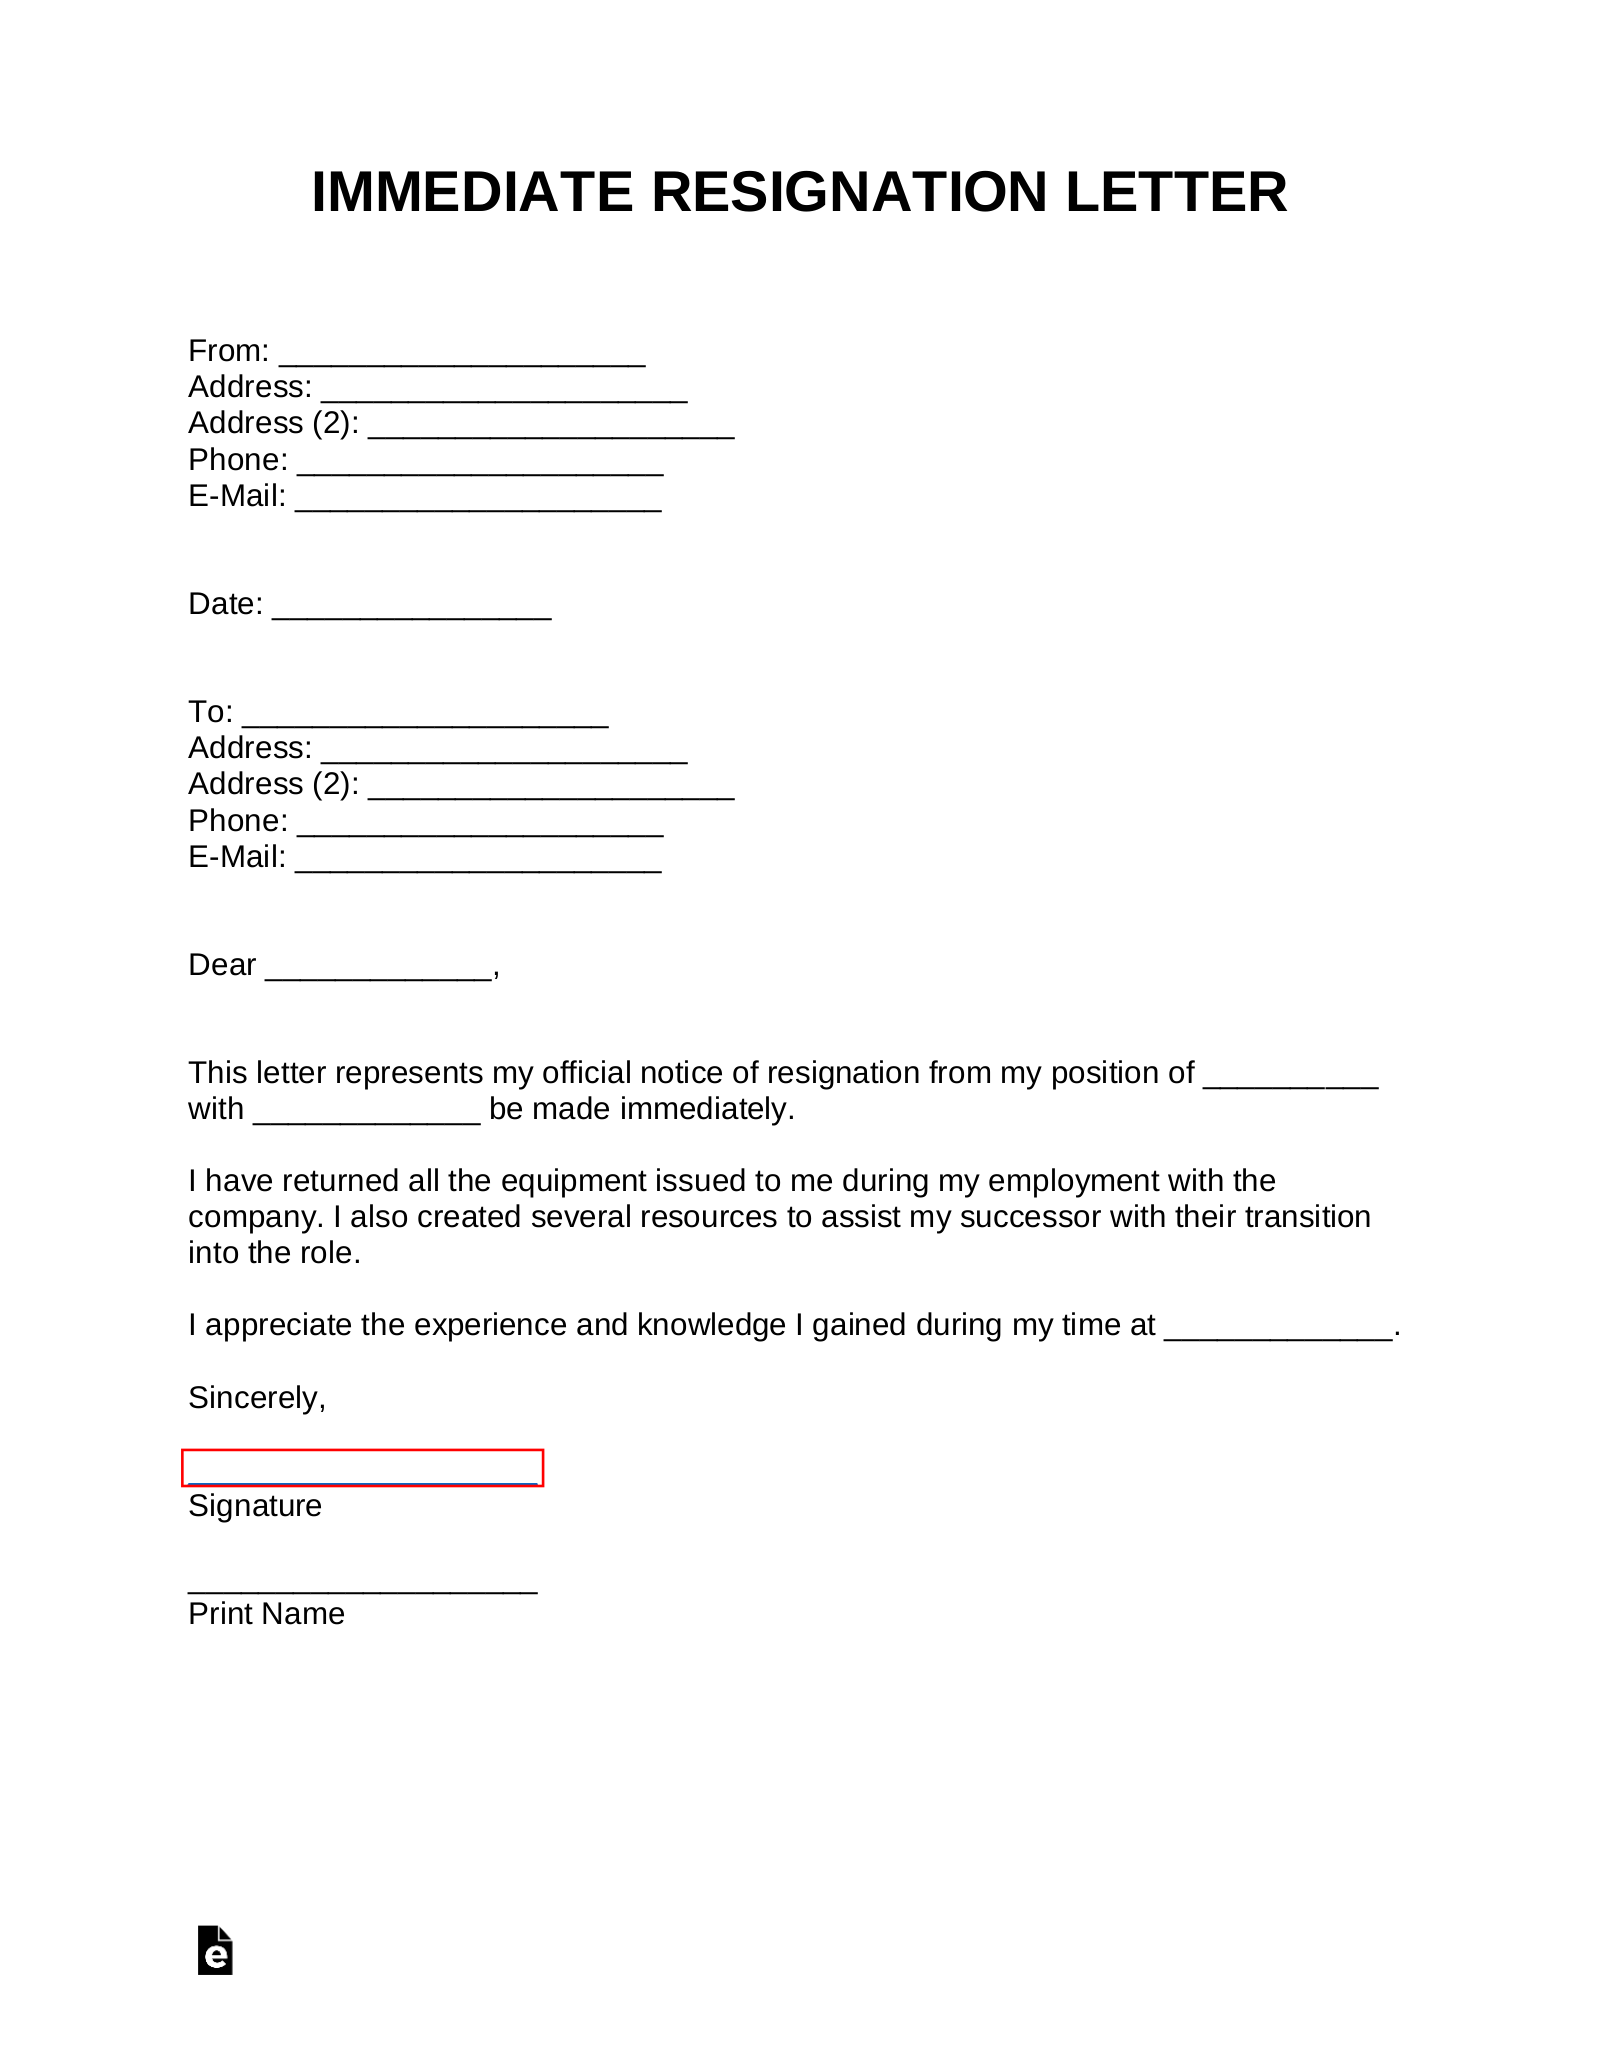 free-immediate-letter-of-resignation-templates-samples-pdf-word